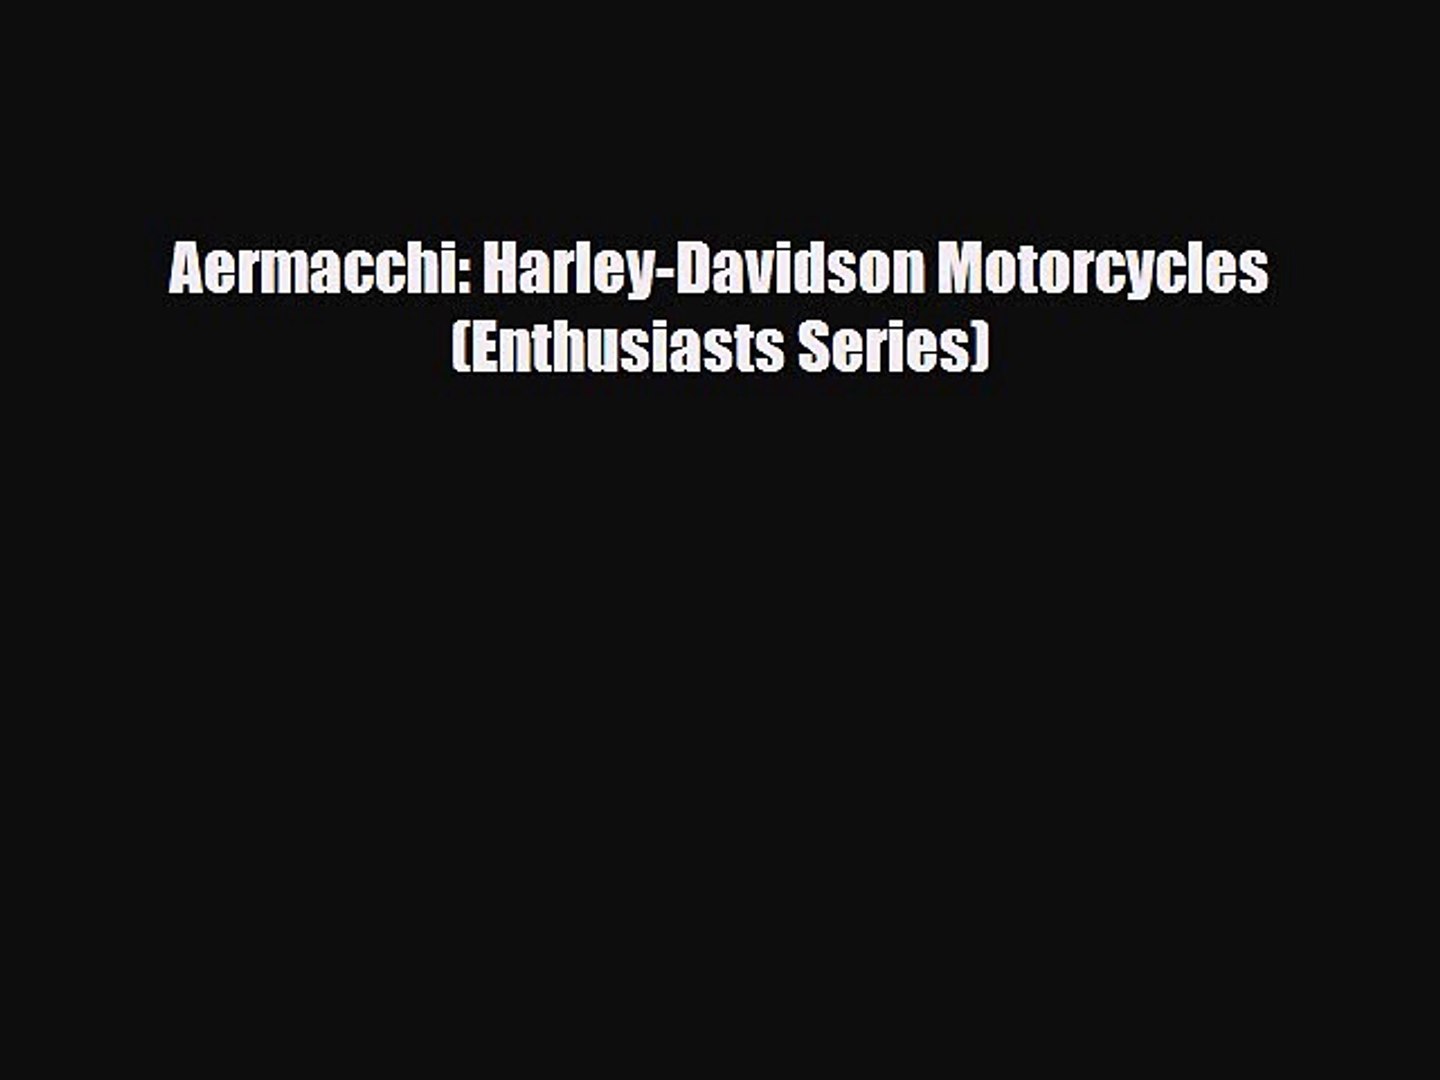 [PDF] Aermacchi: Harley-Davidson Motorcycles (Enthusiasts Series) Read Online